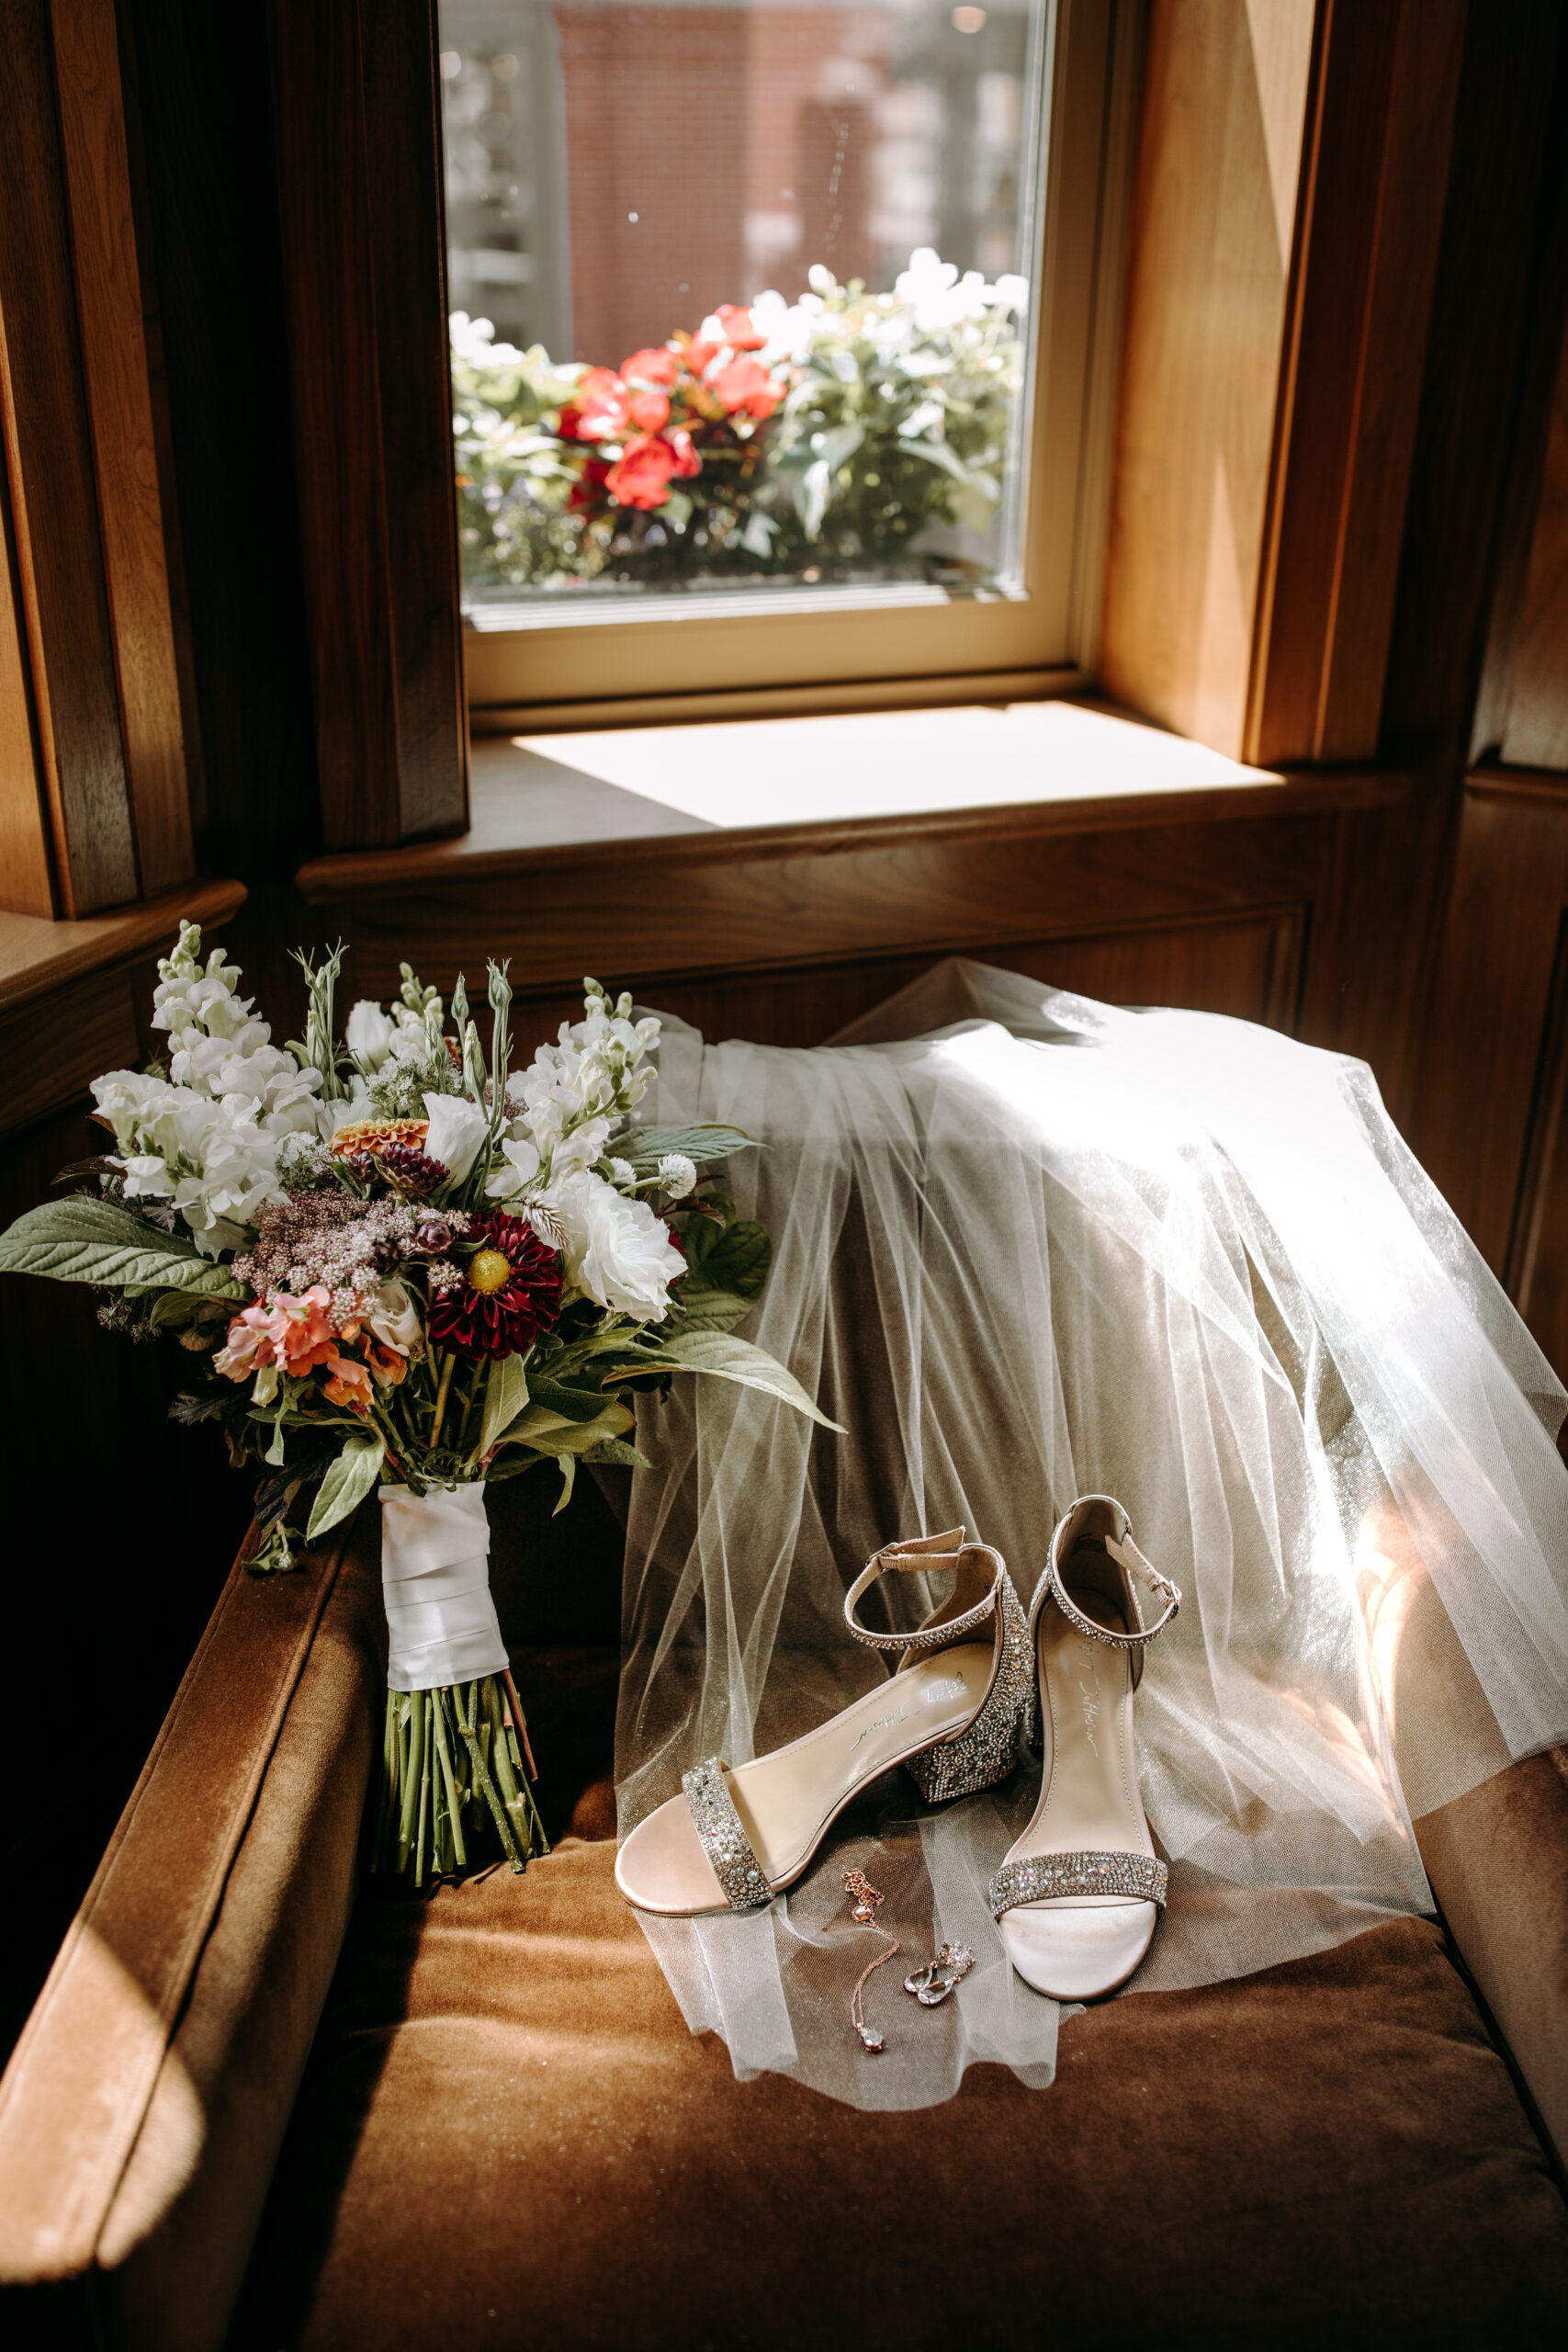 bridal bouquet, wedding shoes, jewelry, veil draped over chair for documentary style detail photos